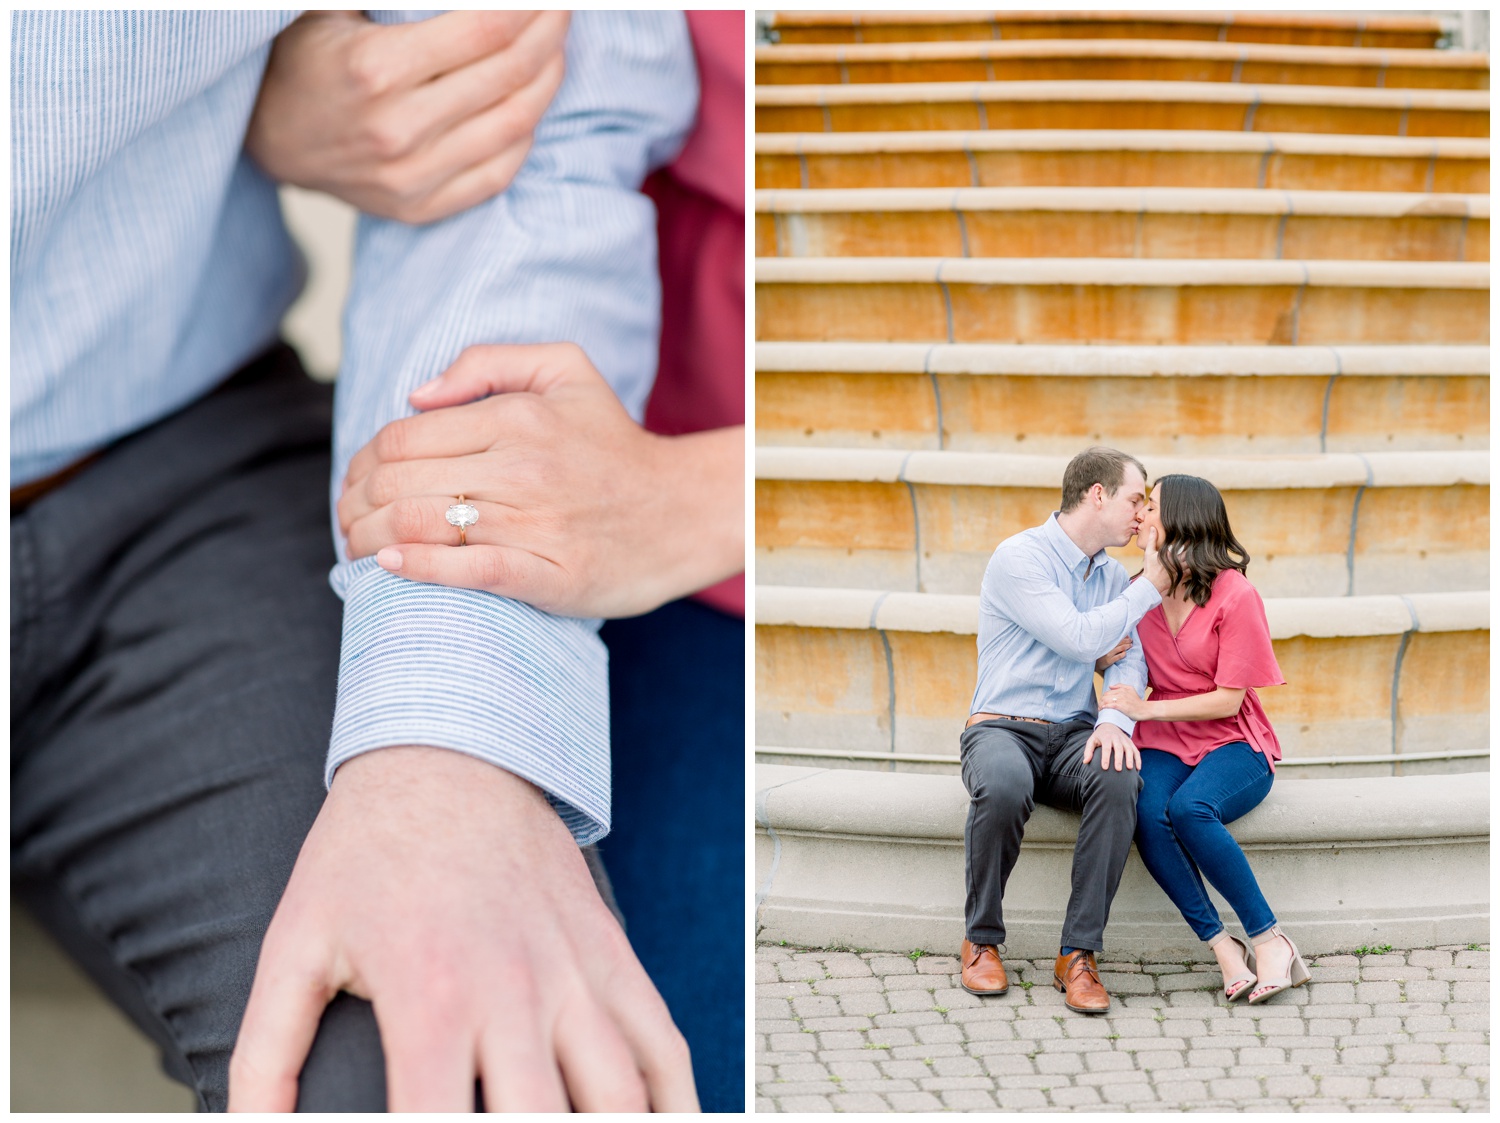 Kissing at Ault Park Fountain - Oval Cut Engagement Ring